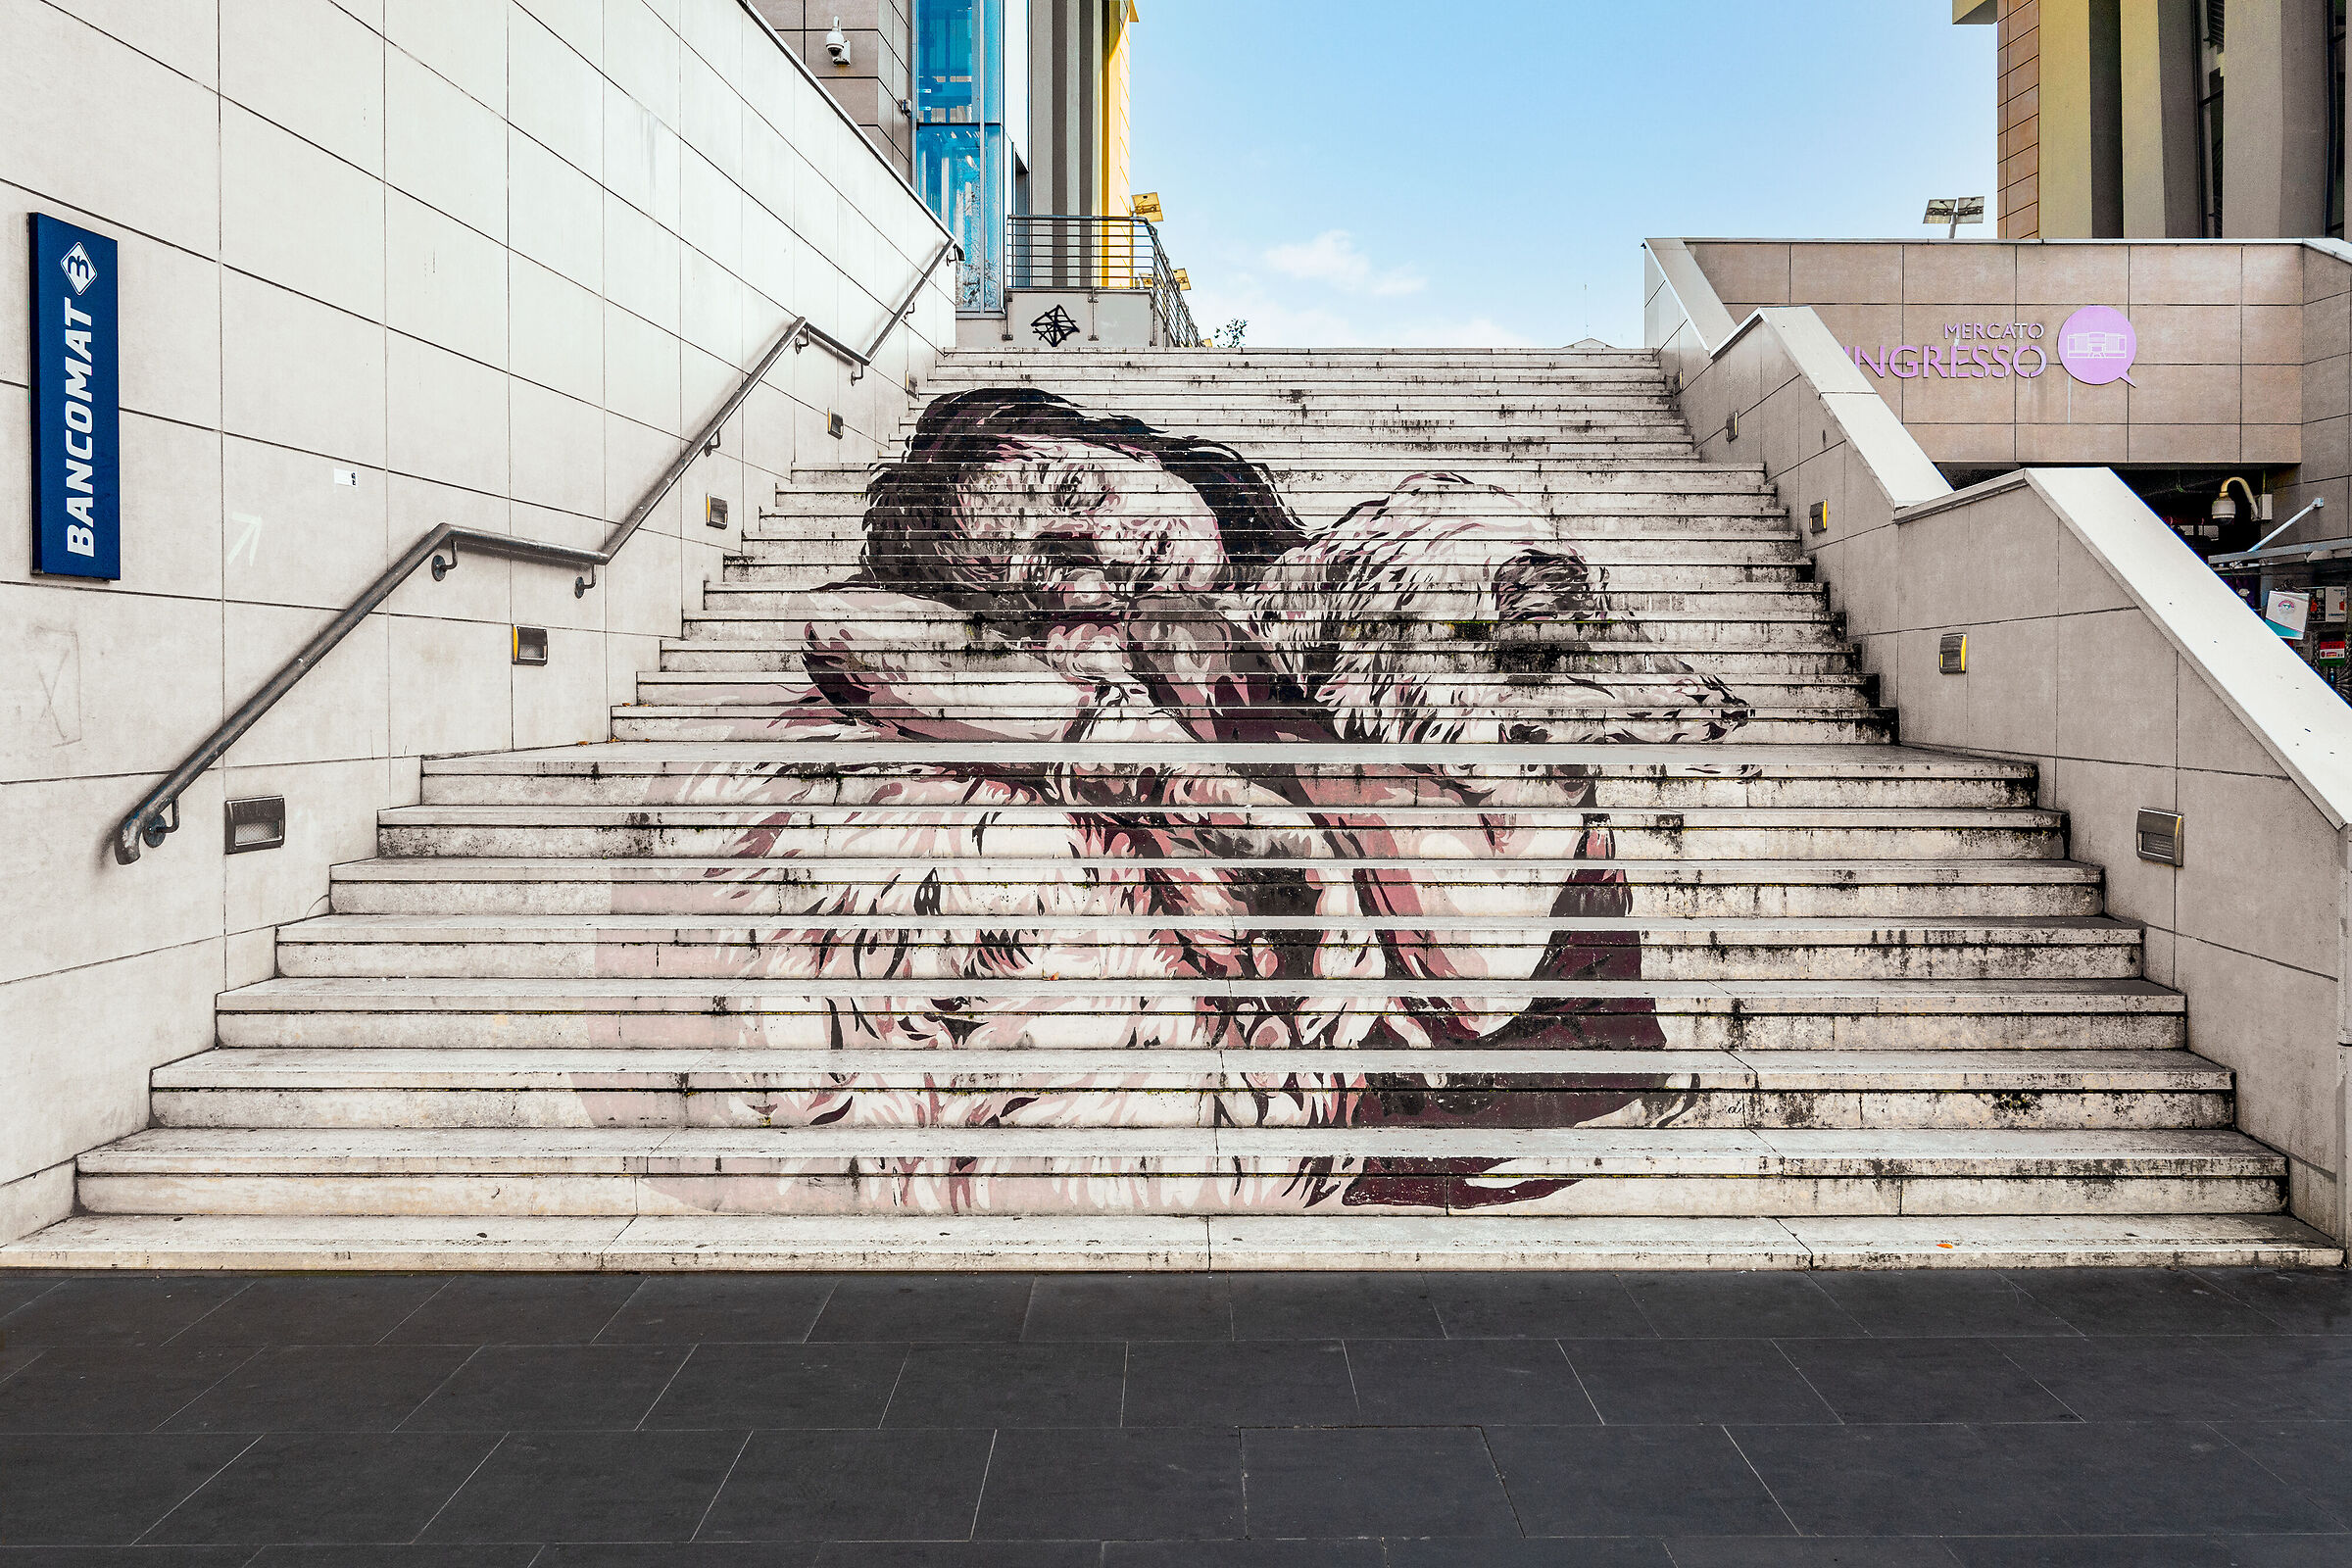 "Nannarella" illuminates the stairs of the Trionfale market #1...